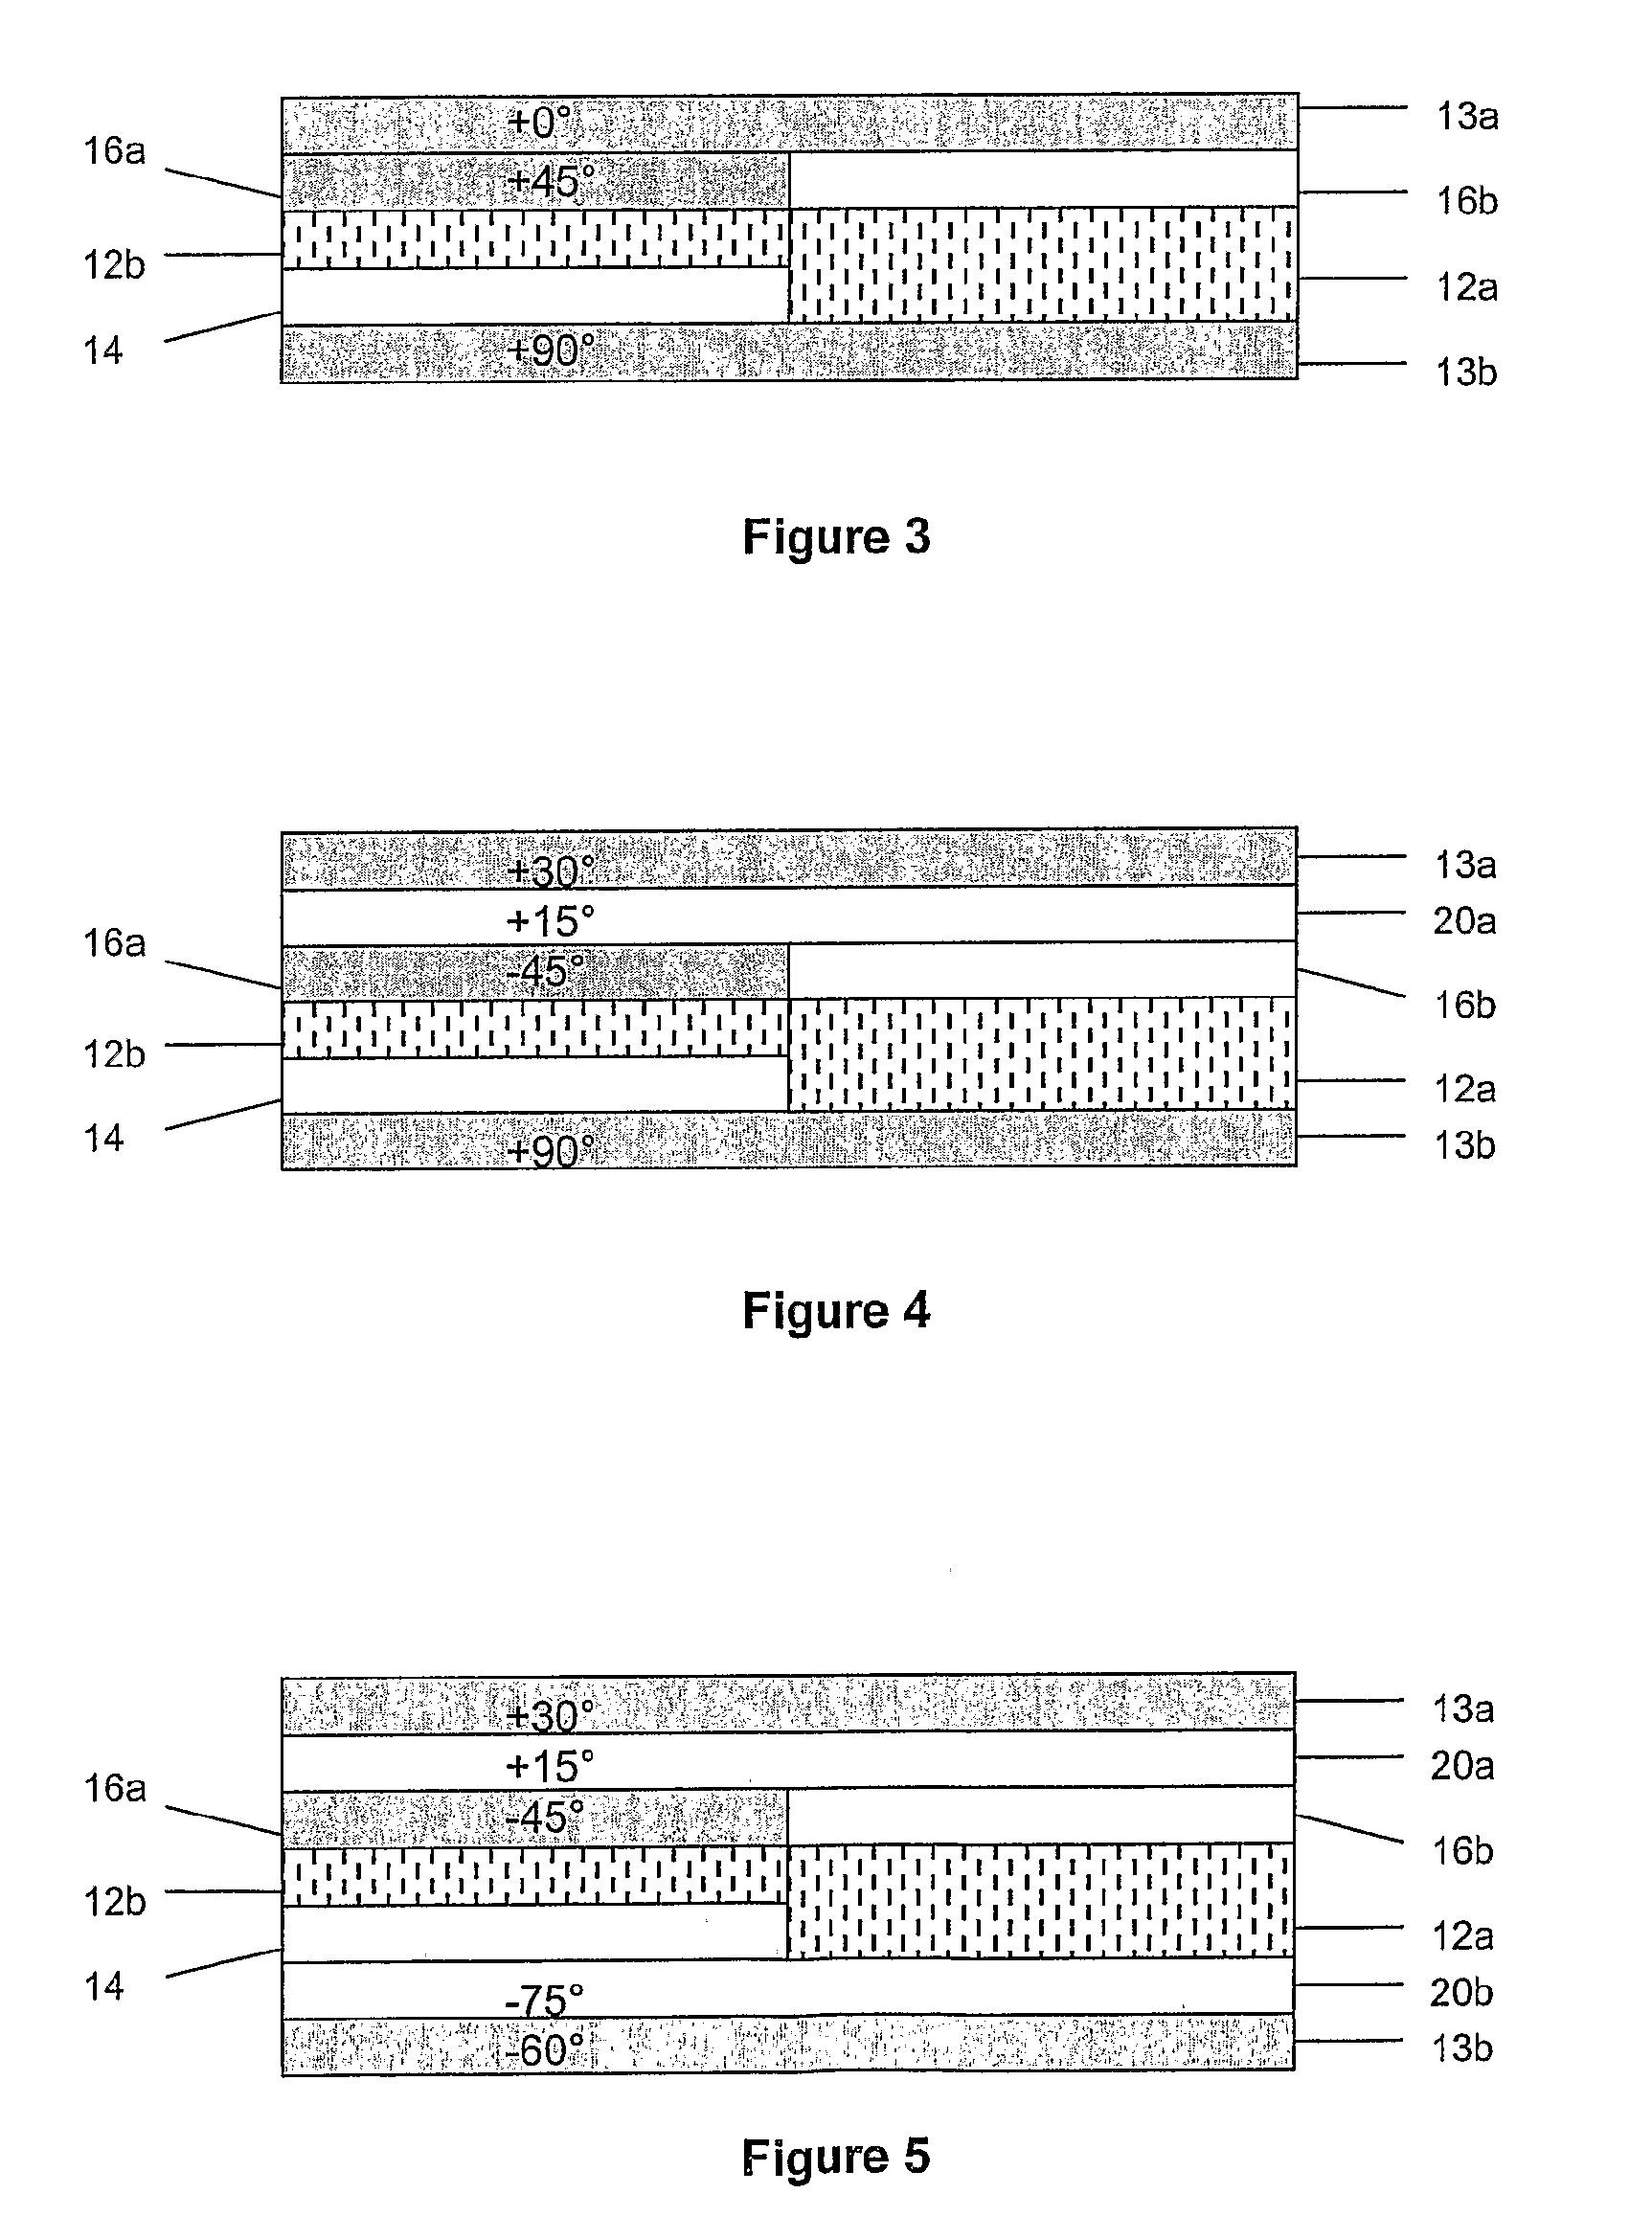 Transflective vertically aligned liquid crystal display with in-cell patterned quarter-wave retarder